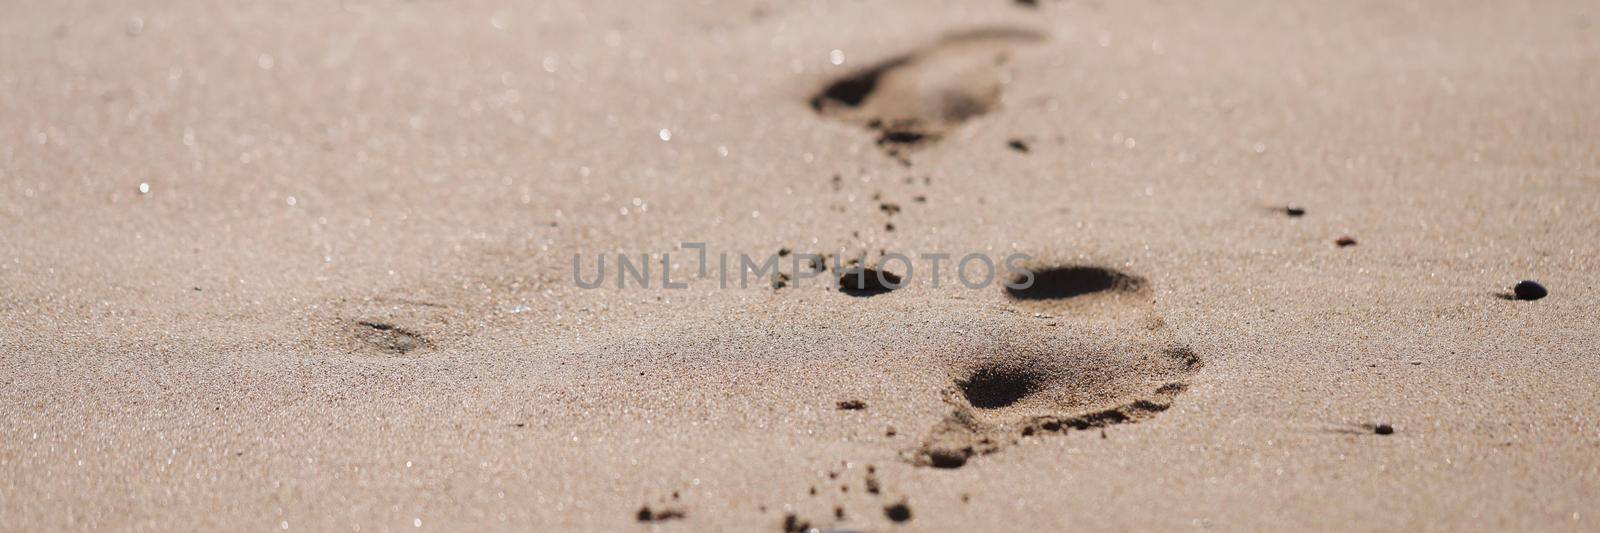 Human foot prints on golden beach sand by kuprevich